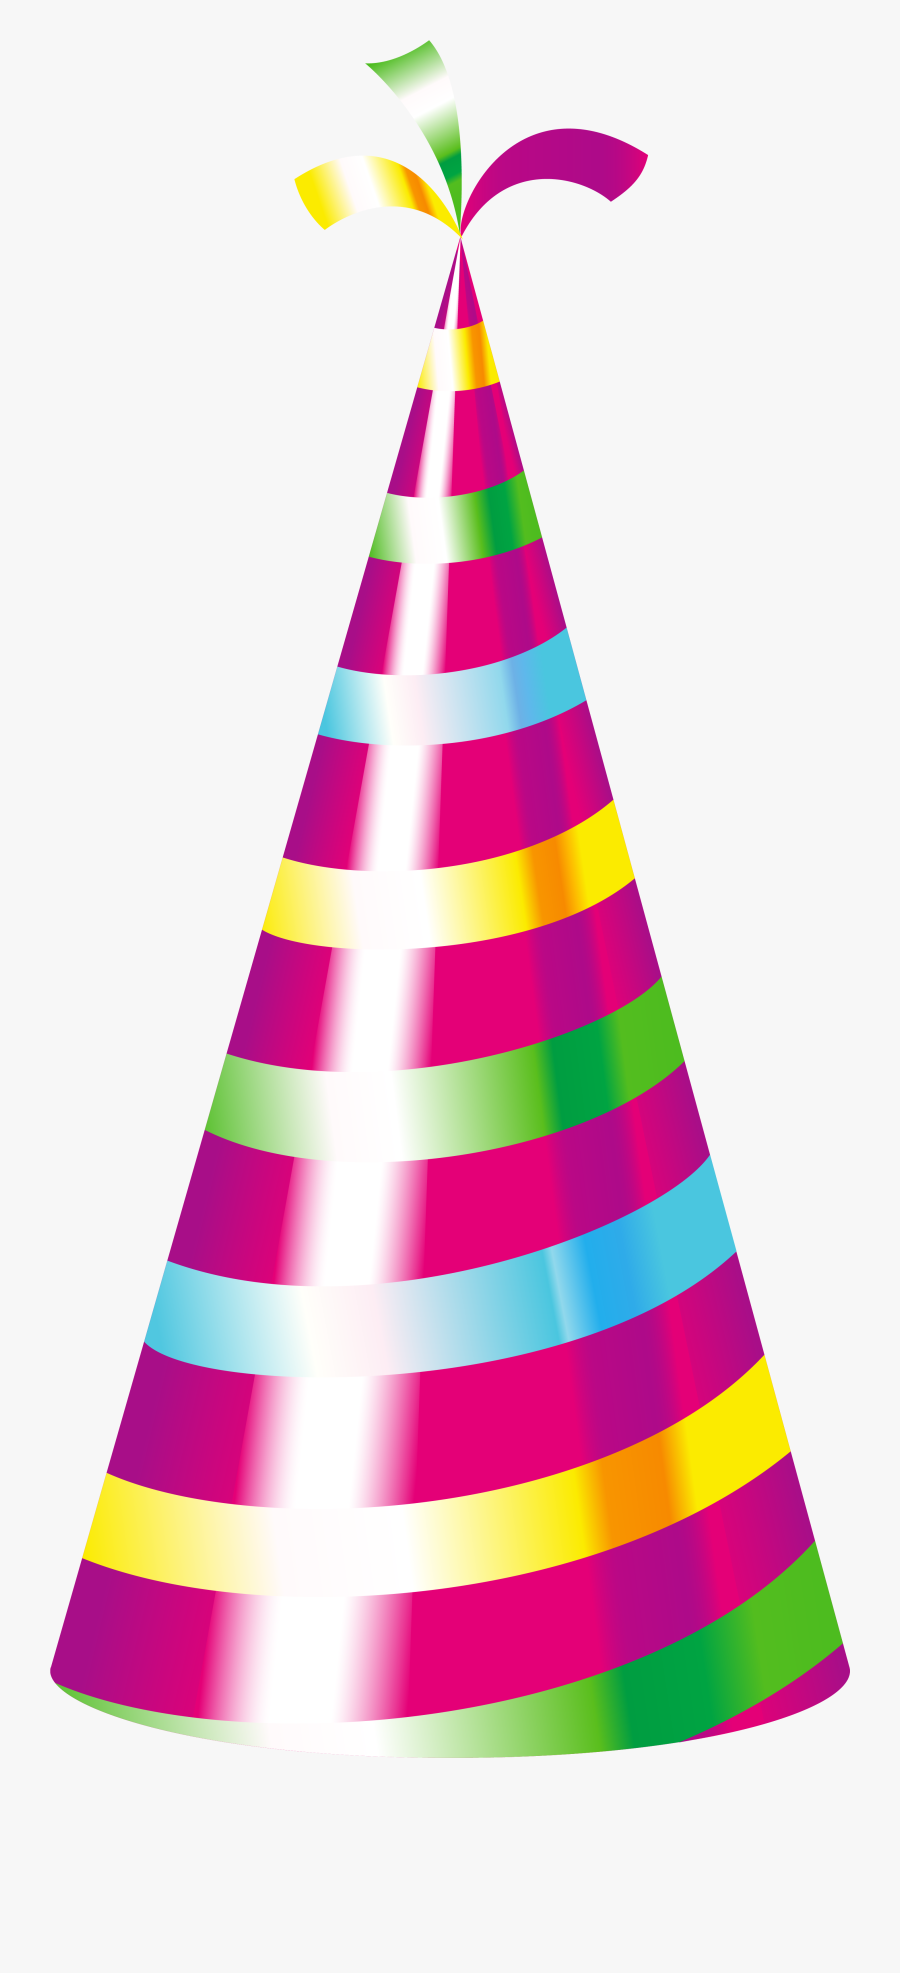 Birthday Party Hat Clip Art - Birthday Hat Clipart Png, Transparent Clipart